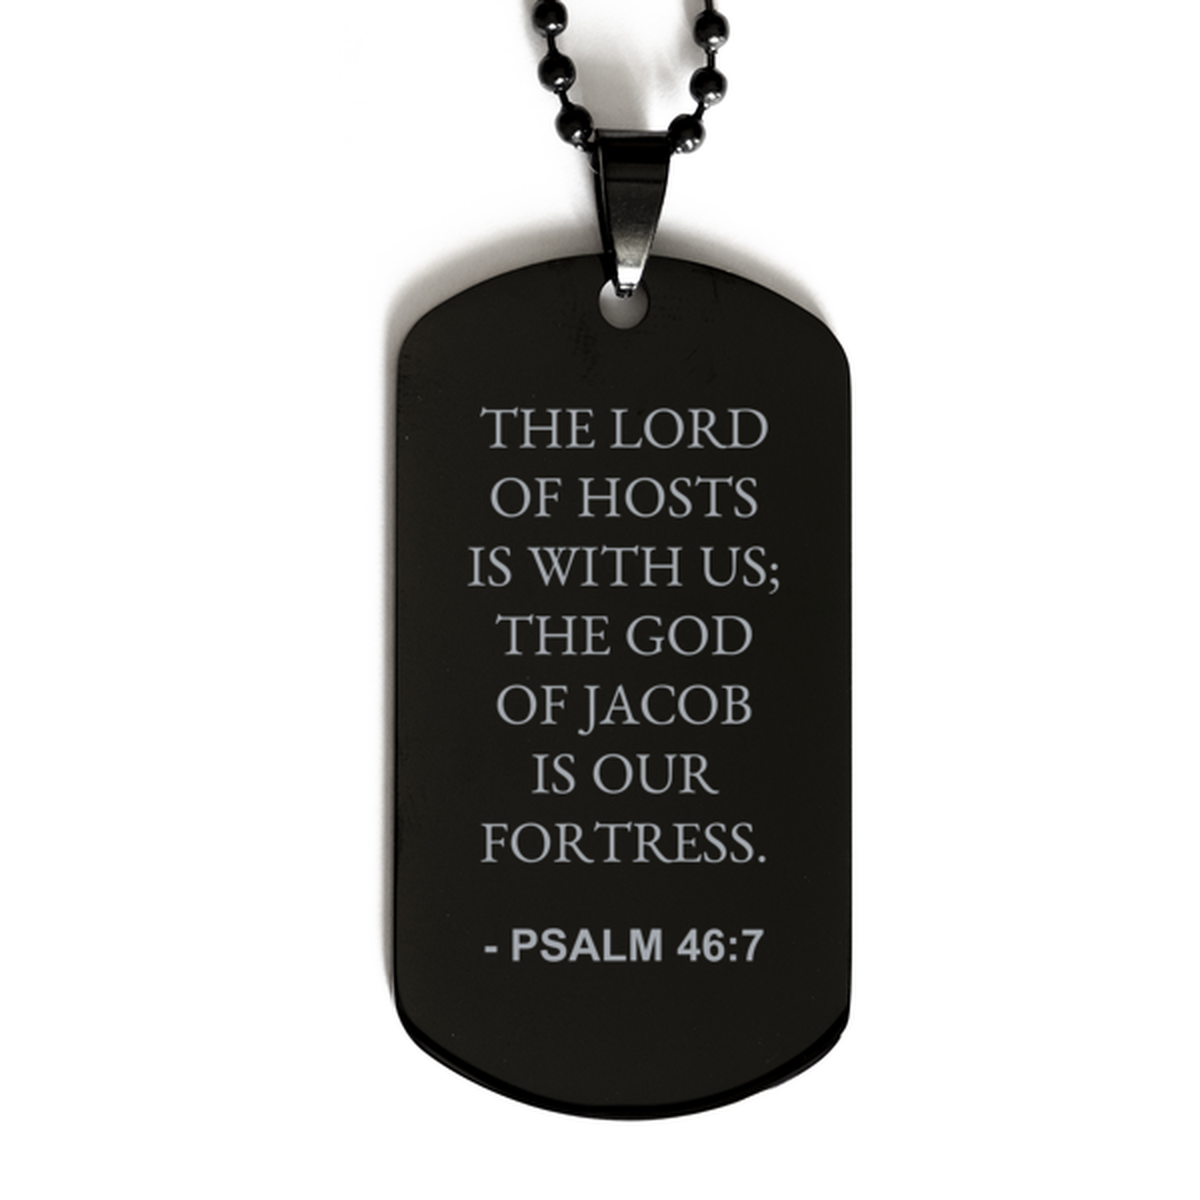 Bible Verse Black Dog Tag, Psalm 46:7 The Lord Of Hosts Is With Us The God Of Jacob Is, Christian Inspirational Necklace Gifts For Men Women